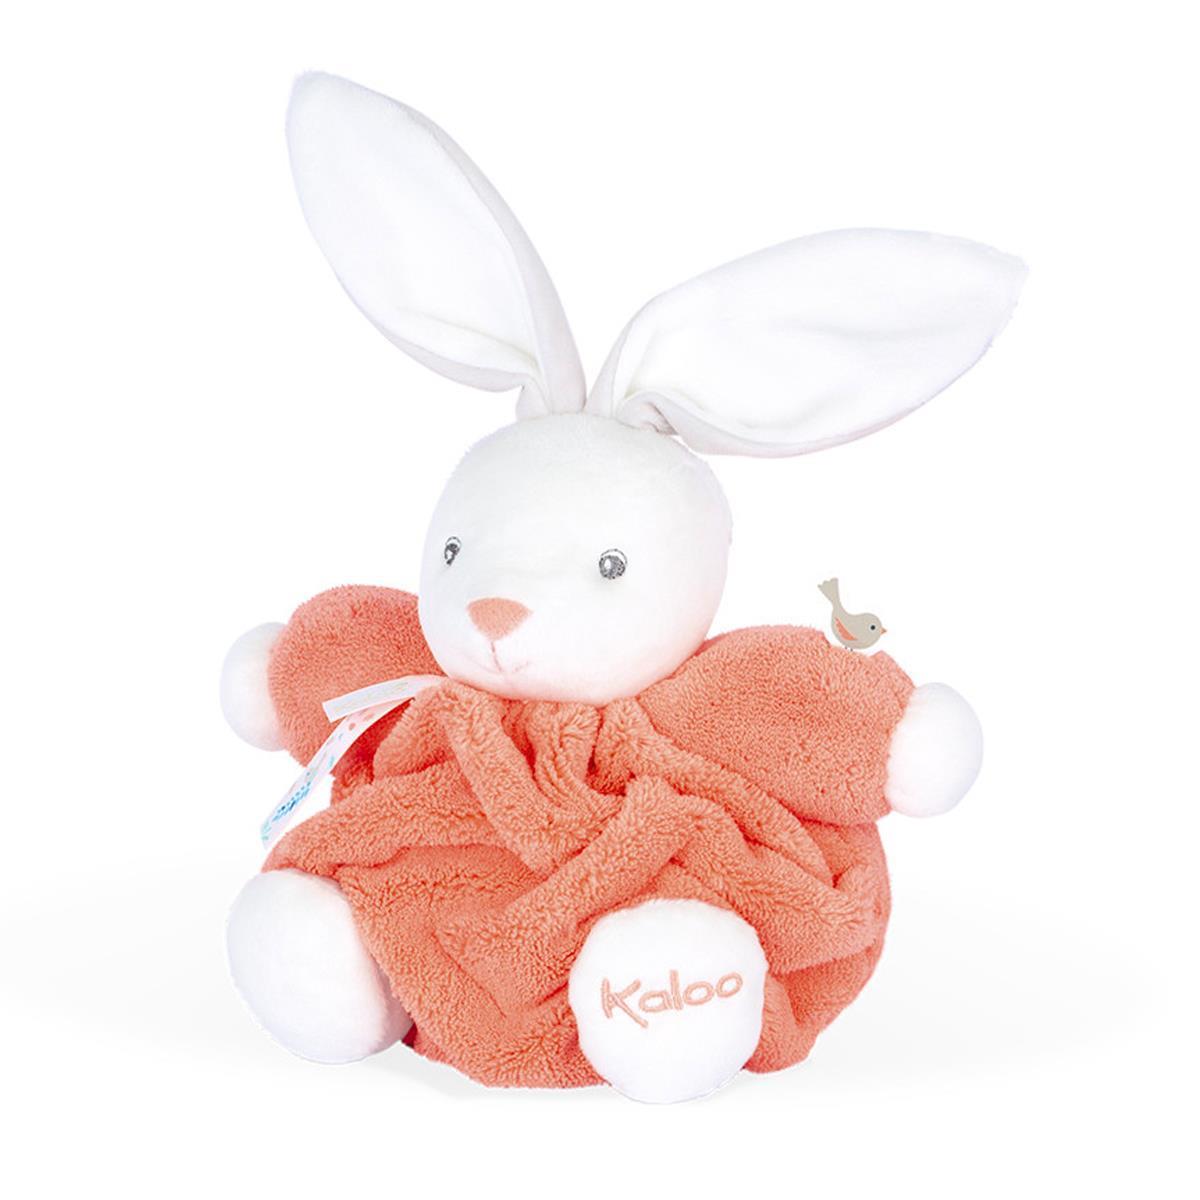 Kaloo Plume Chubby Small Coral Rabbit Soft Toy  - 18 cm